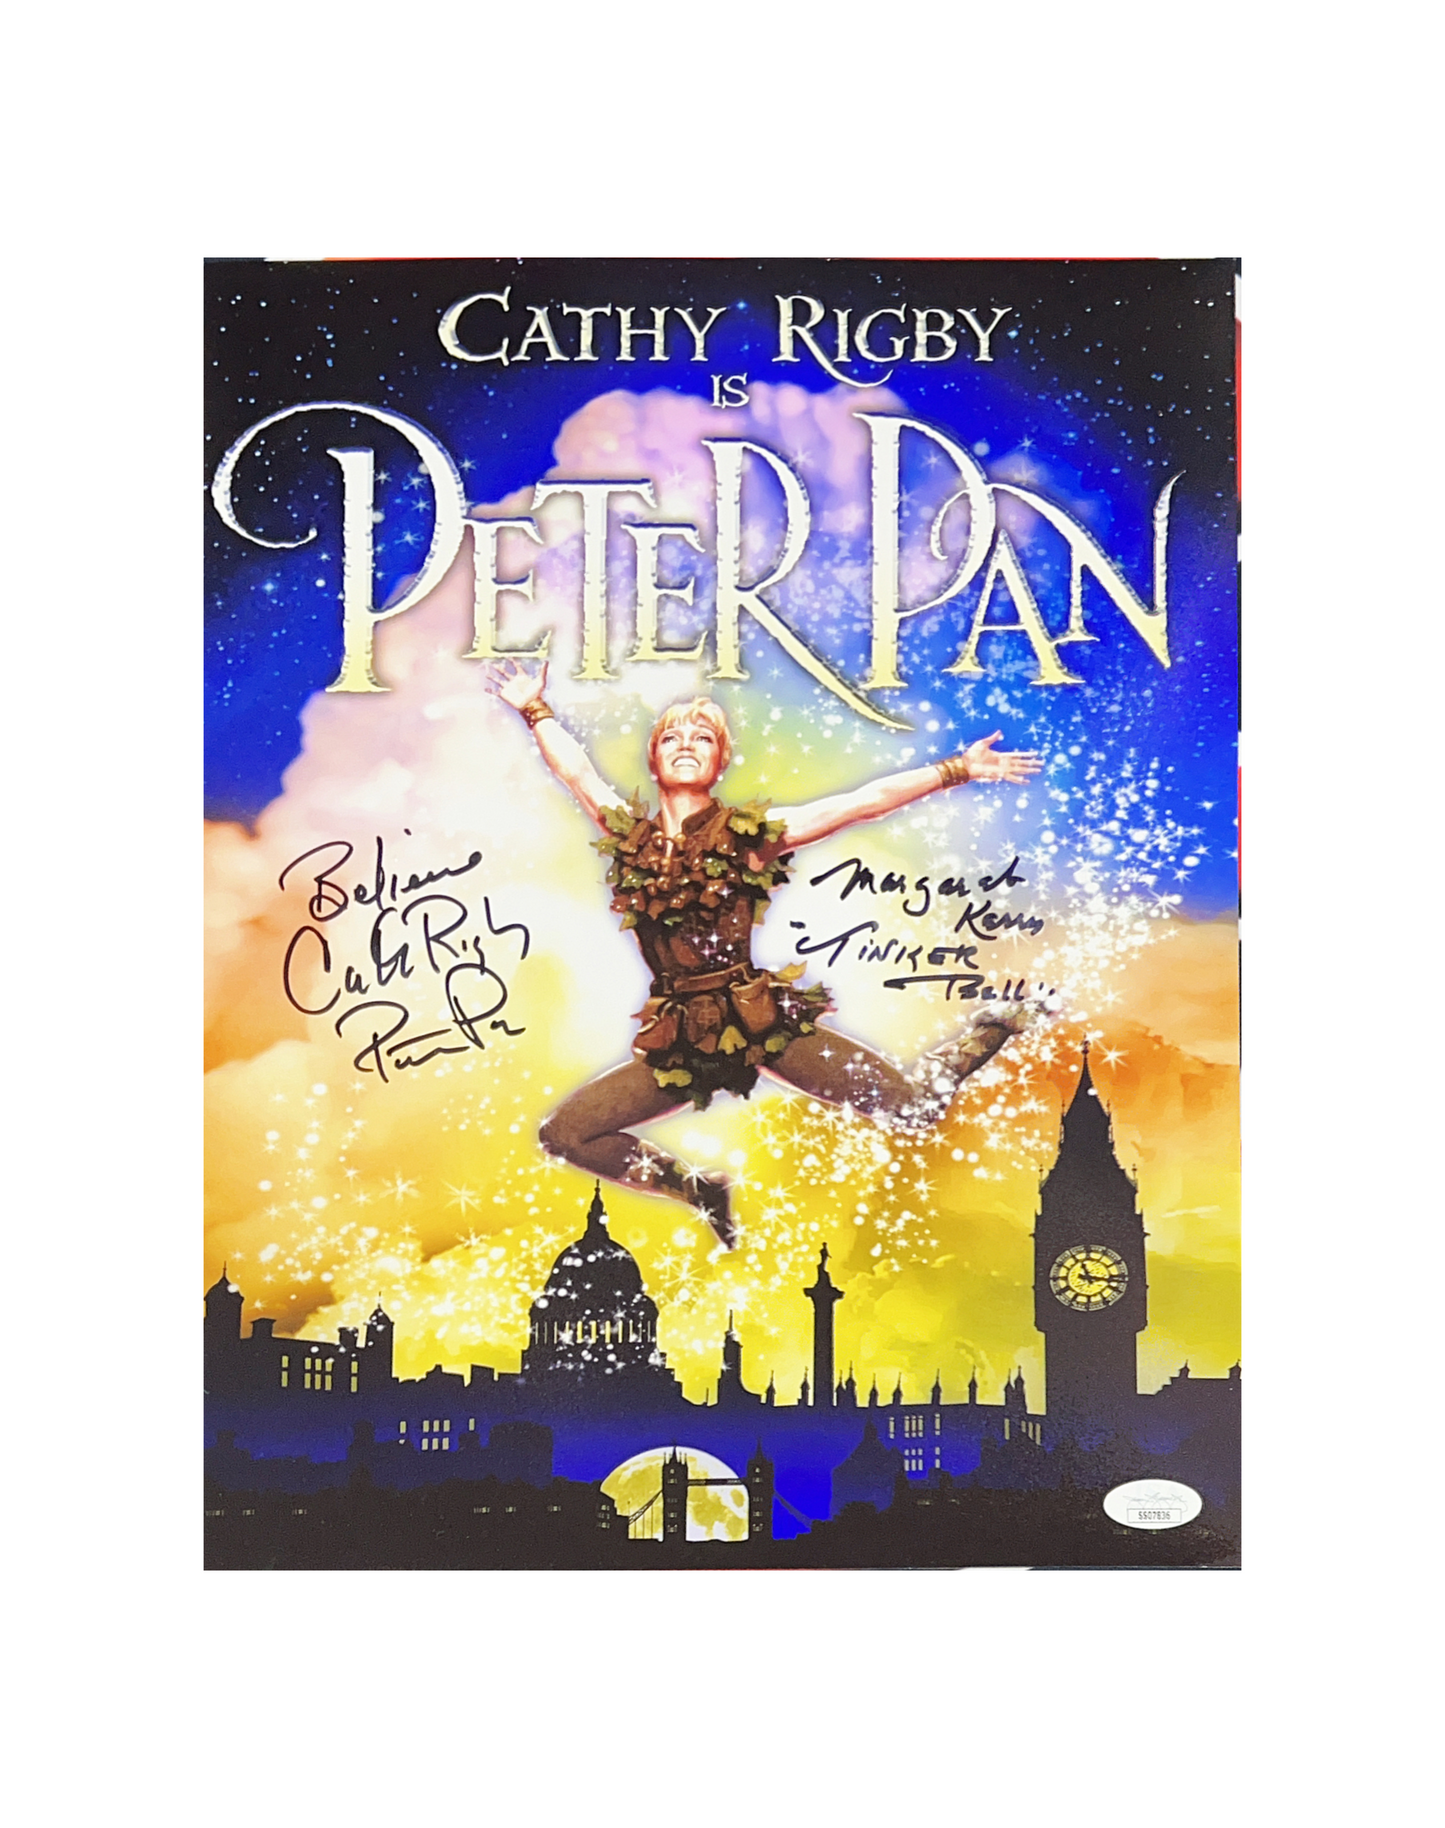 Cathy Rigby & Margaret Kerry Autographed Peter Pan 11x14 "Believe Peter Pan & Tinker Bell" Inscriptions JSA